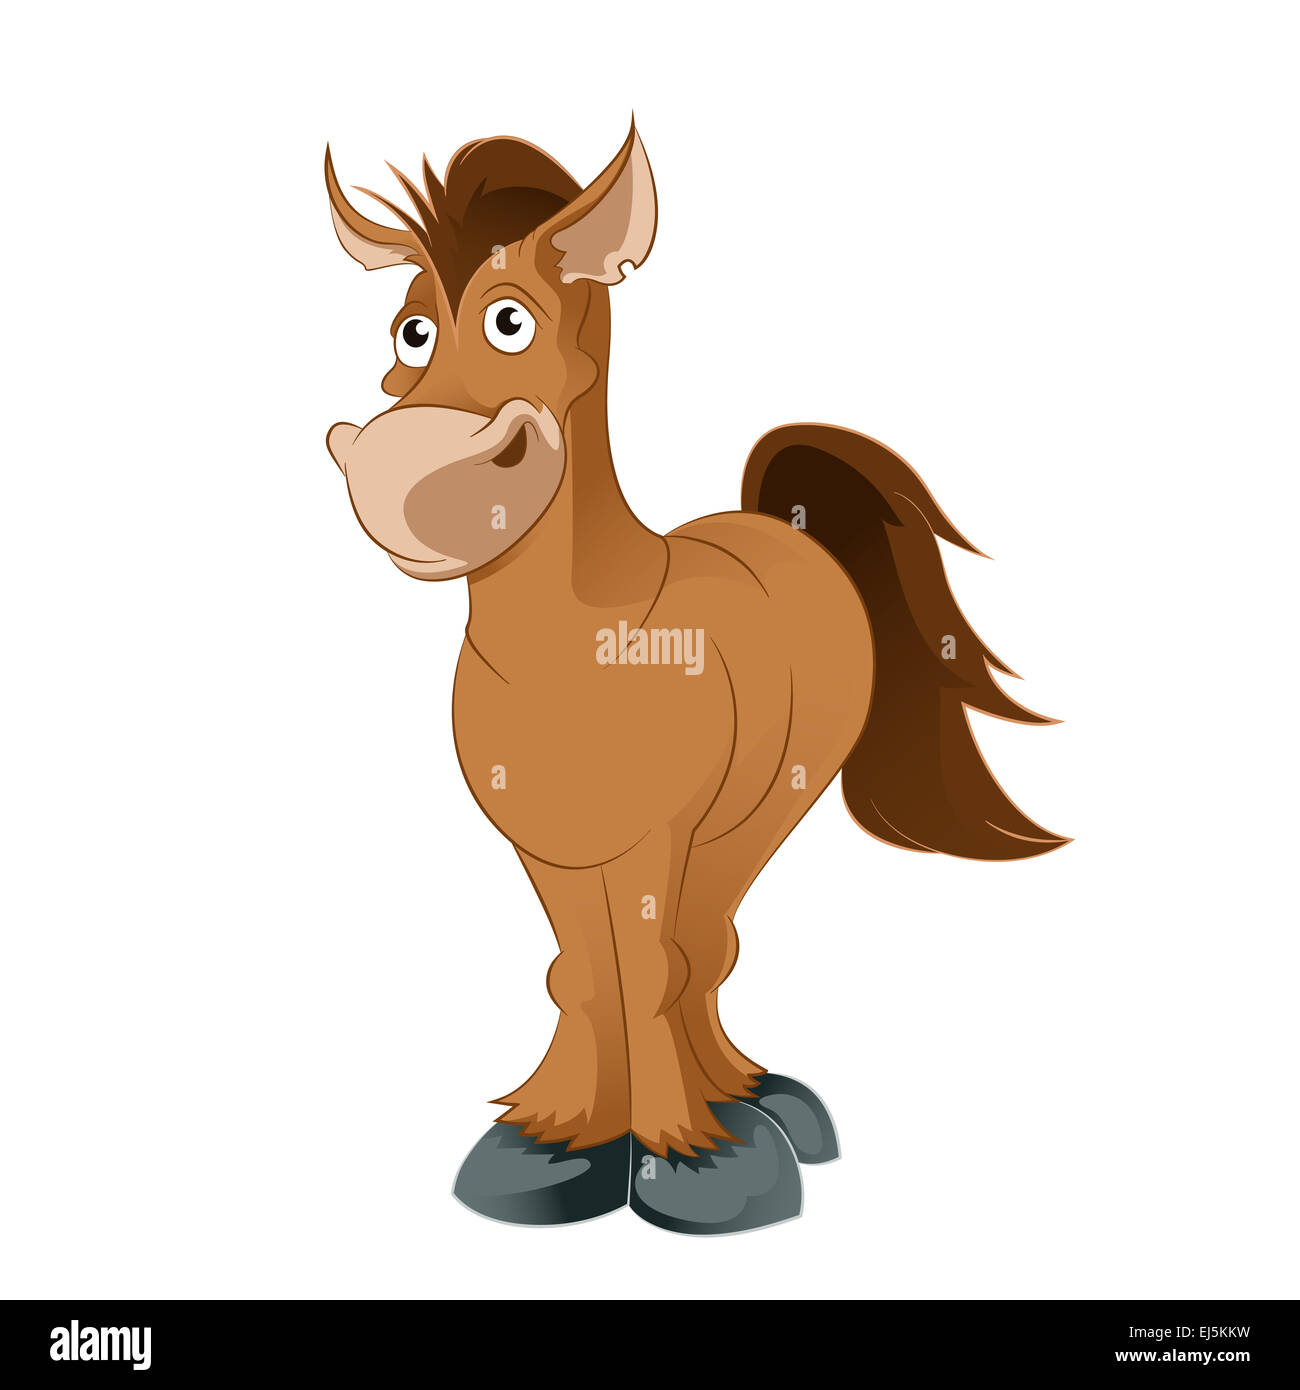 laughing horse clipart